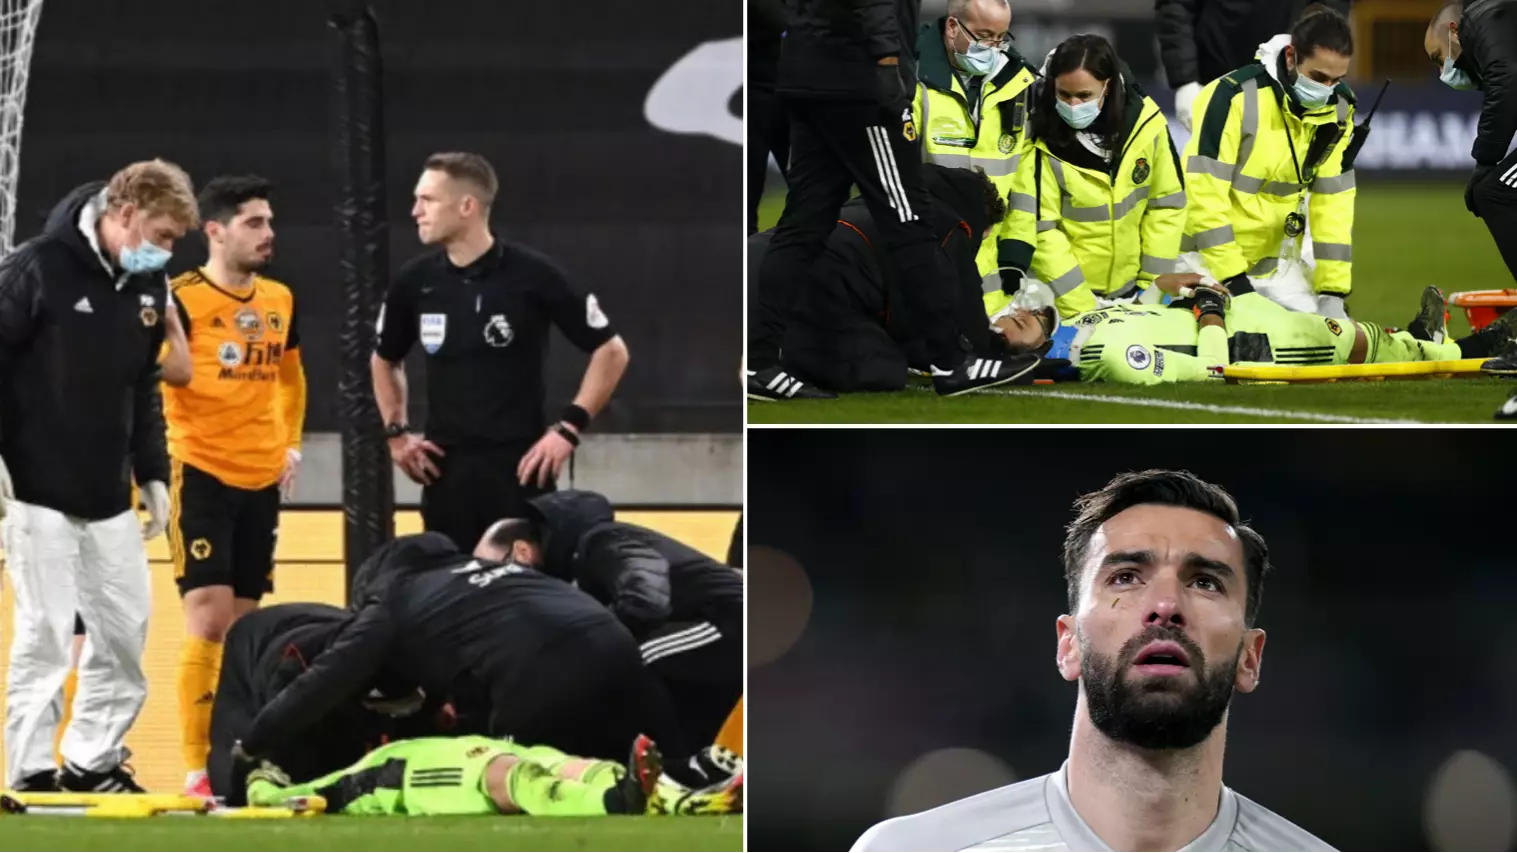 Rui Patricio Receives Blow To The Head During Wolves Vs Liverpool